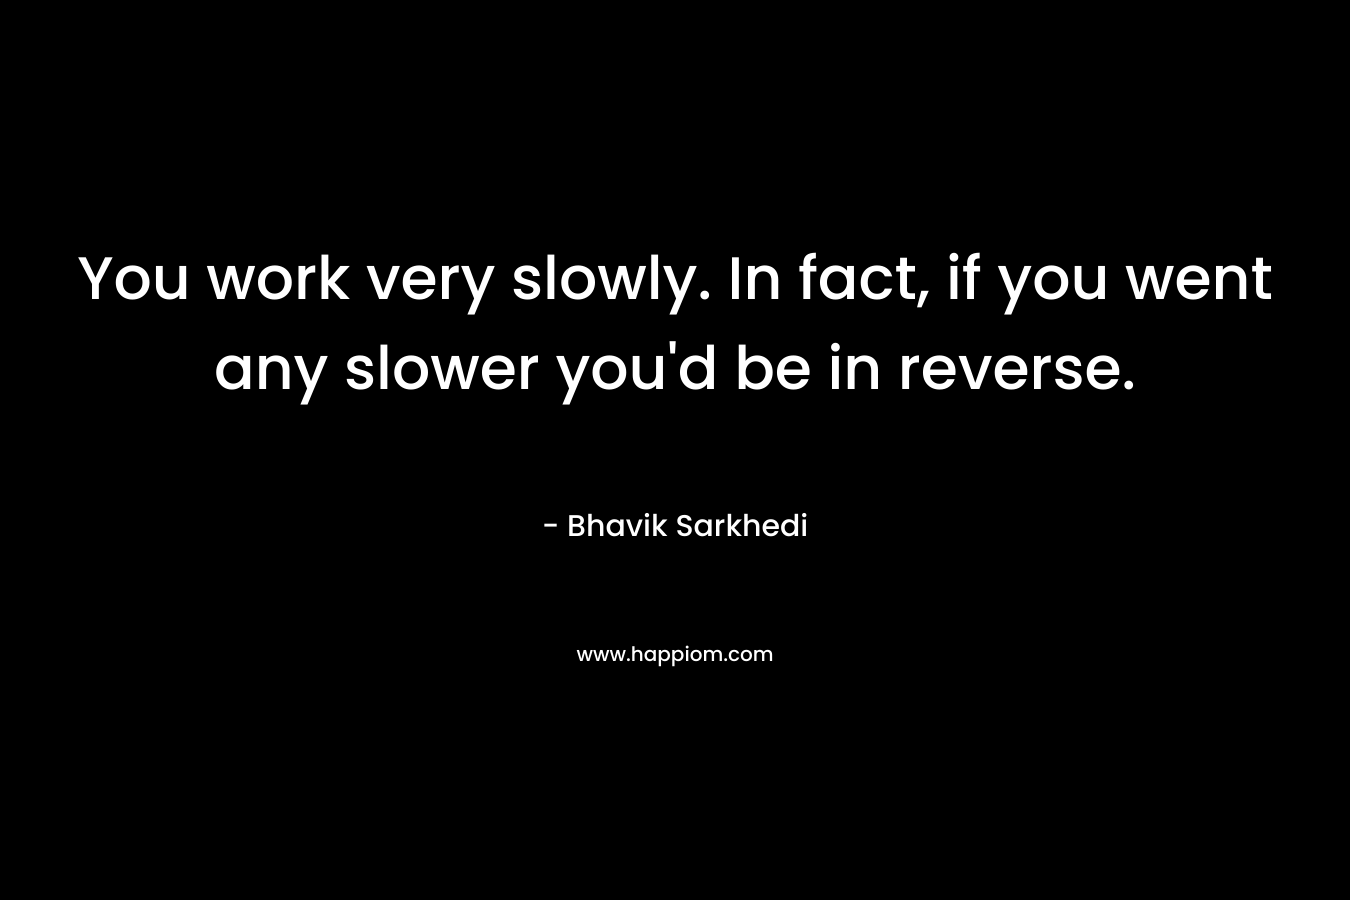 You work very slowly. In fact, if you went any slower you'd be in reverse.